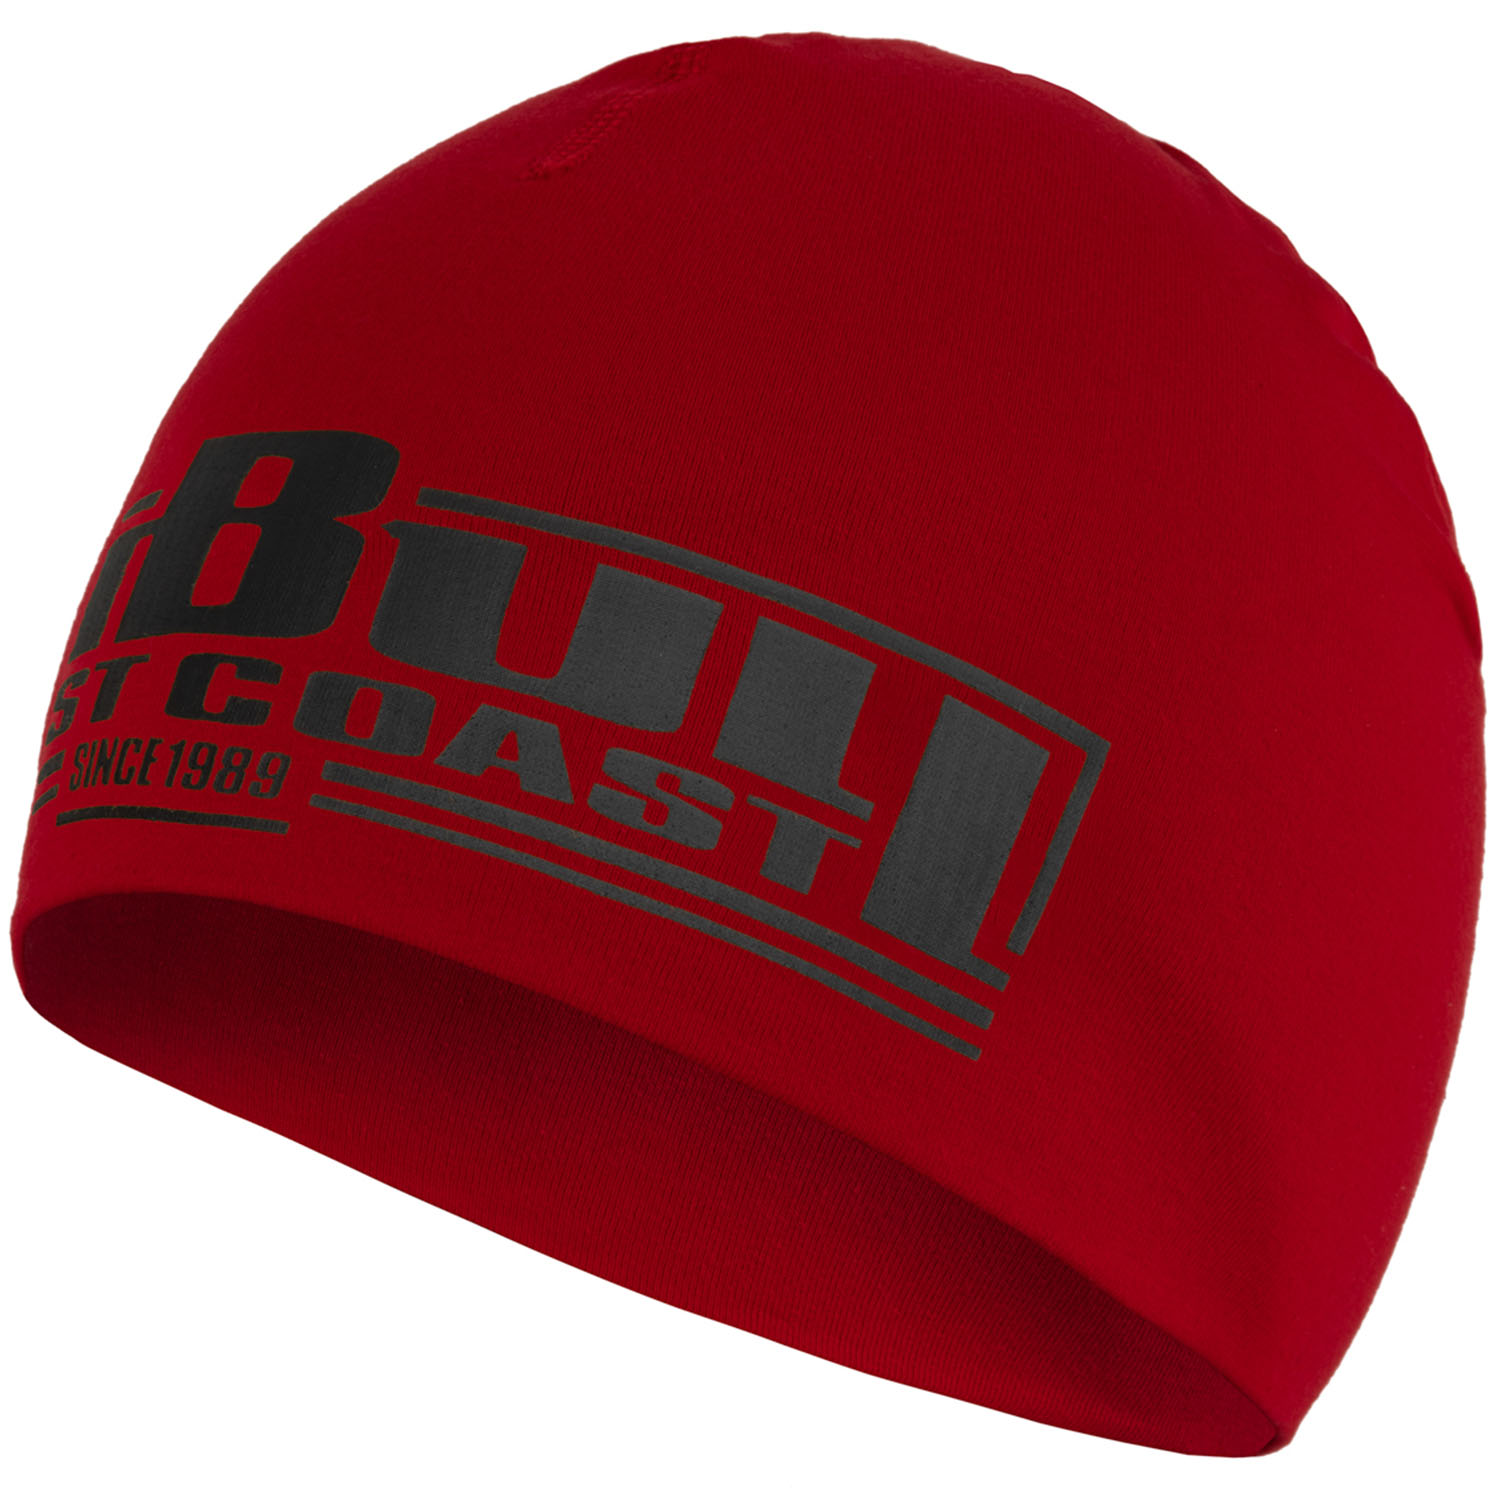 Pit Bull West Coast Beanie, Classic Boxing 2, rot